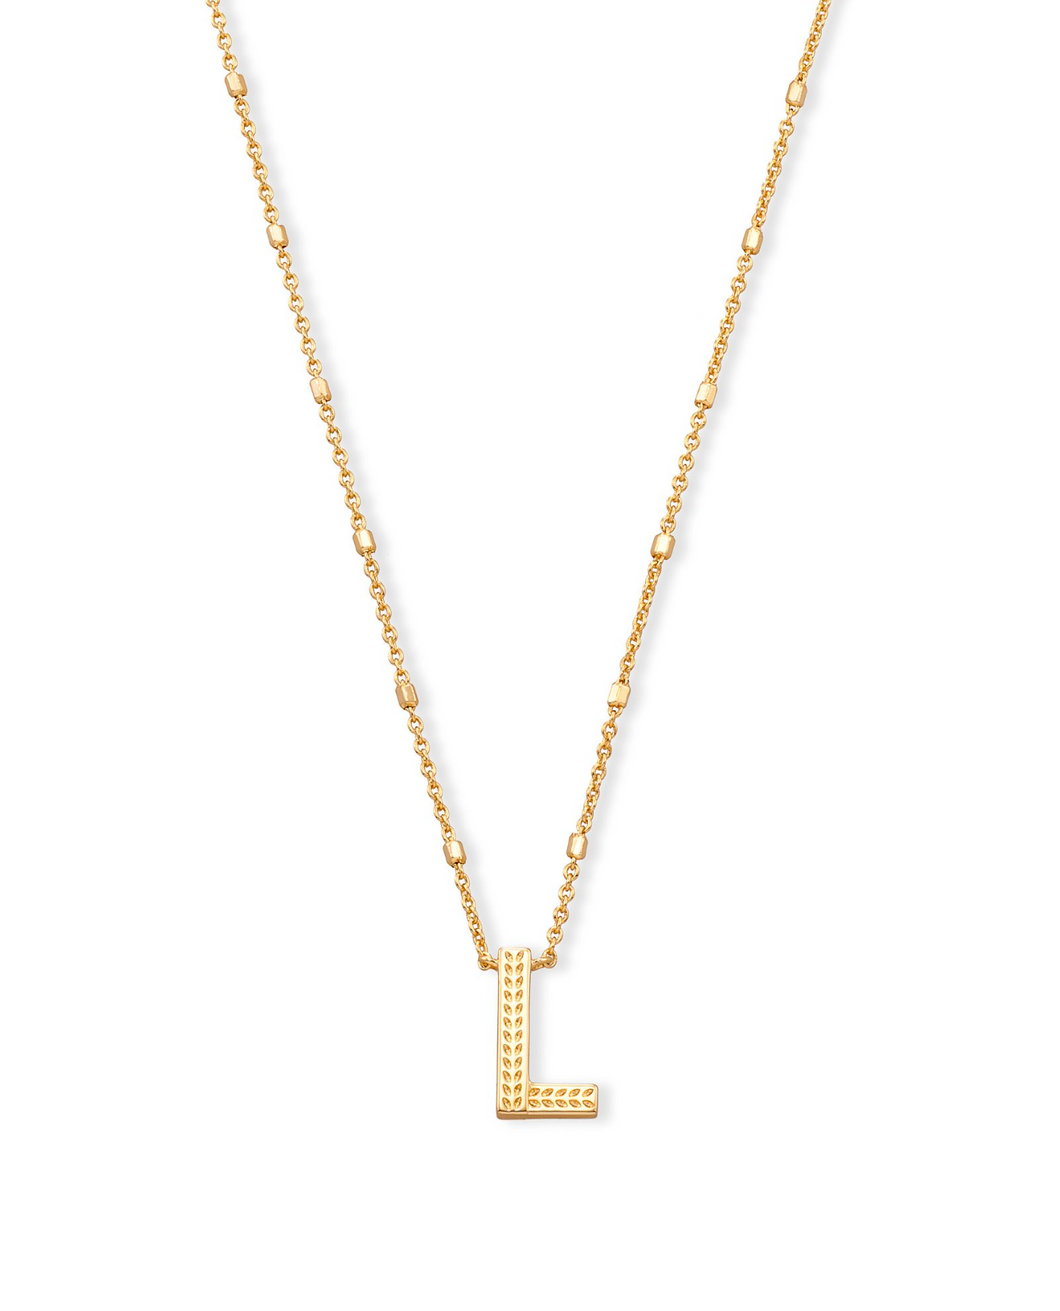 Letter L Pendant Necklace in Gold by Kendra Scott